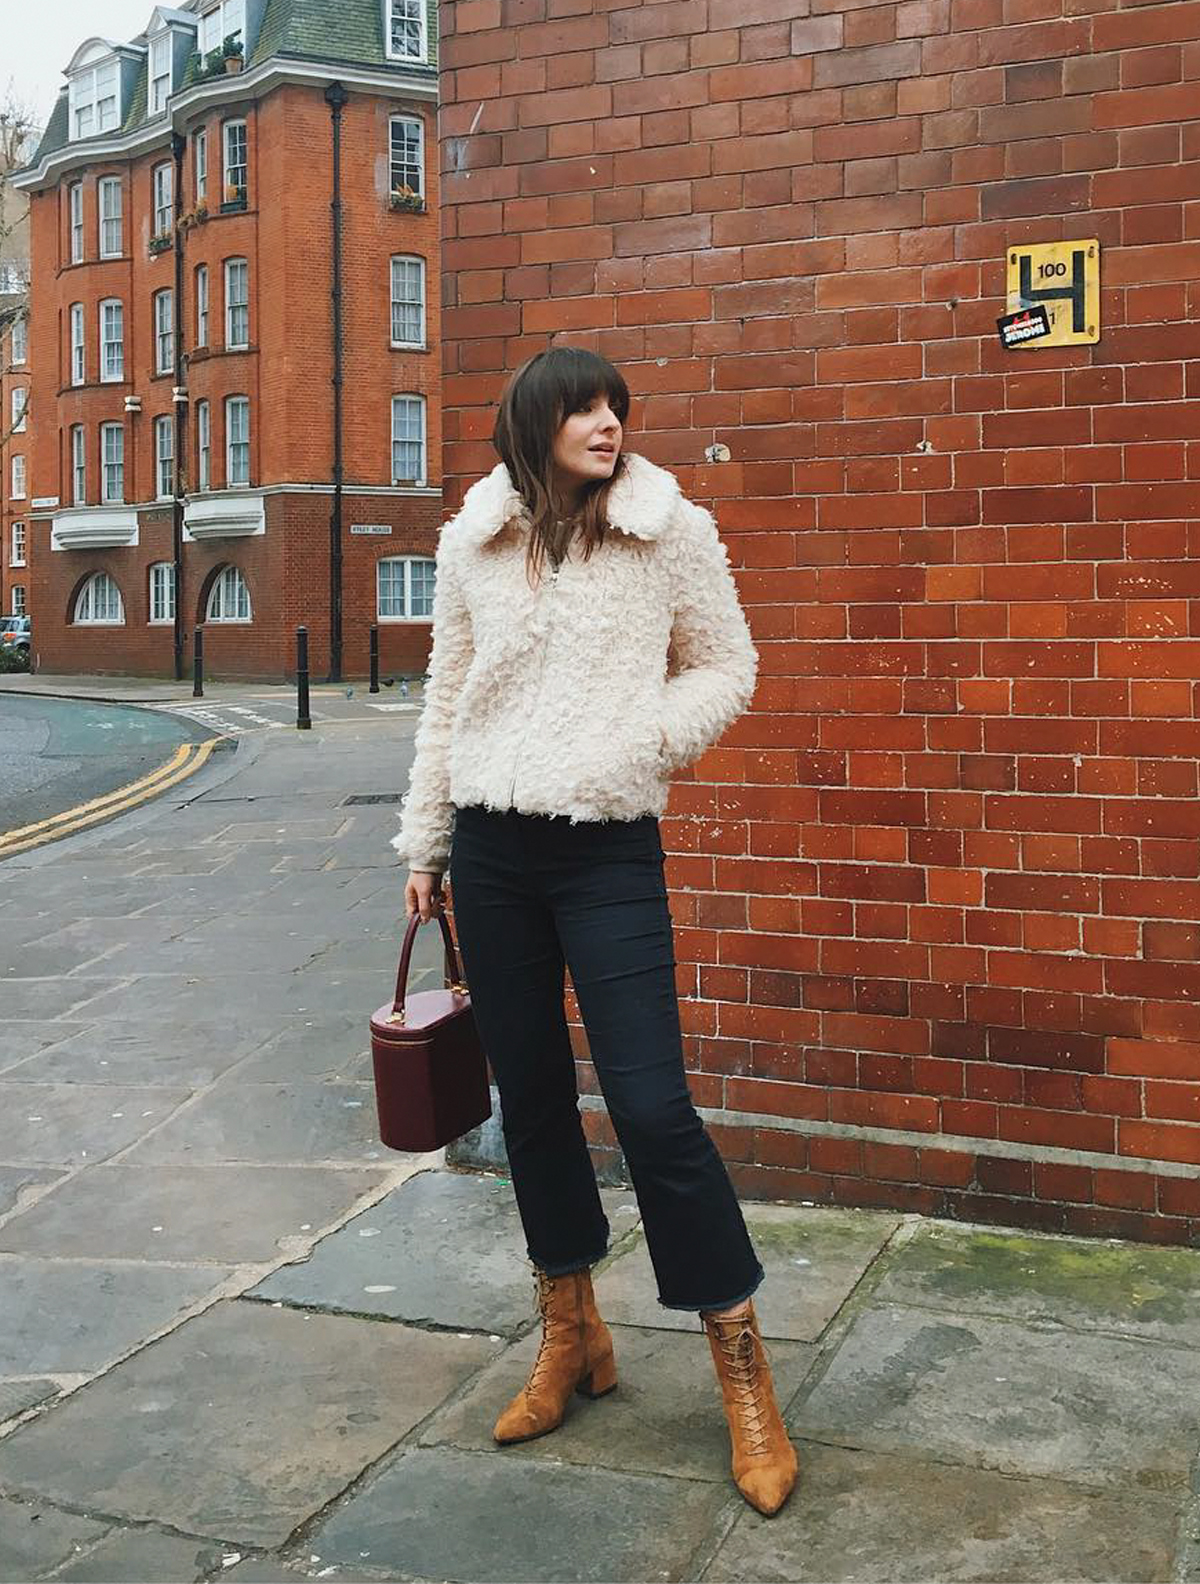 Best Lace-Up Boots 2019: Liv Purvis wears a pair of lace-up boots